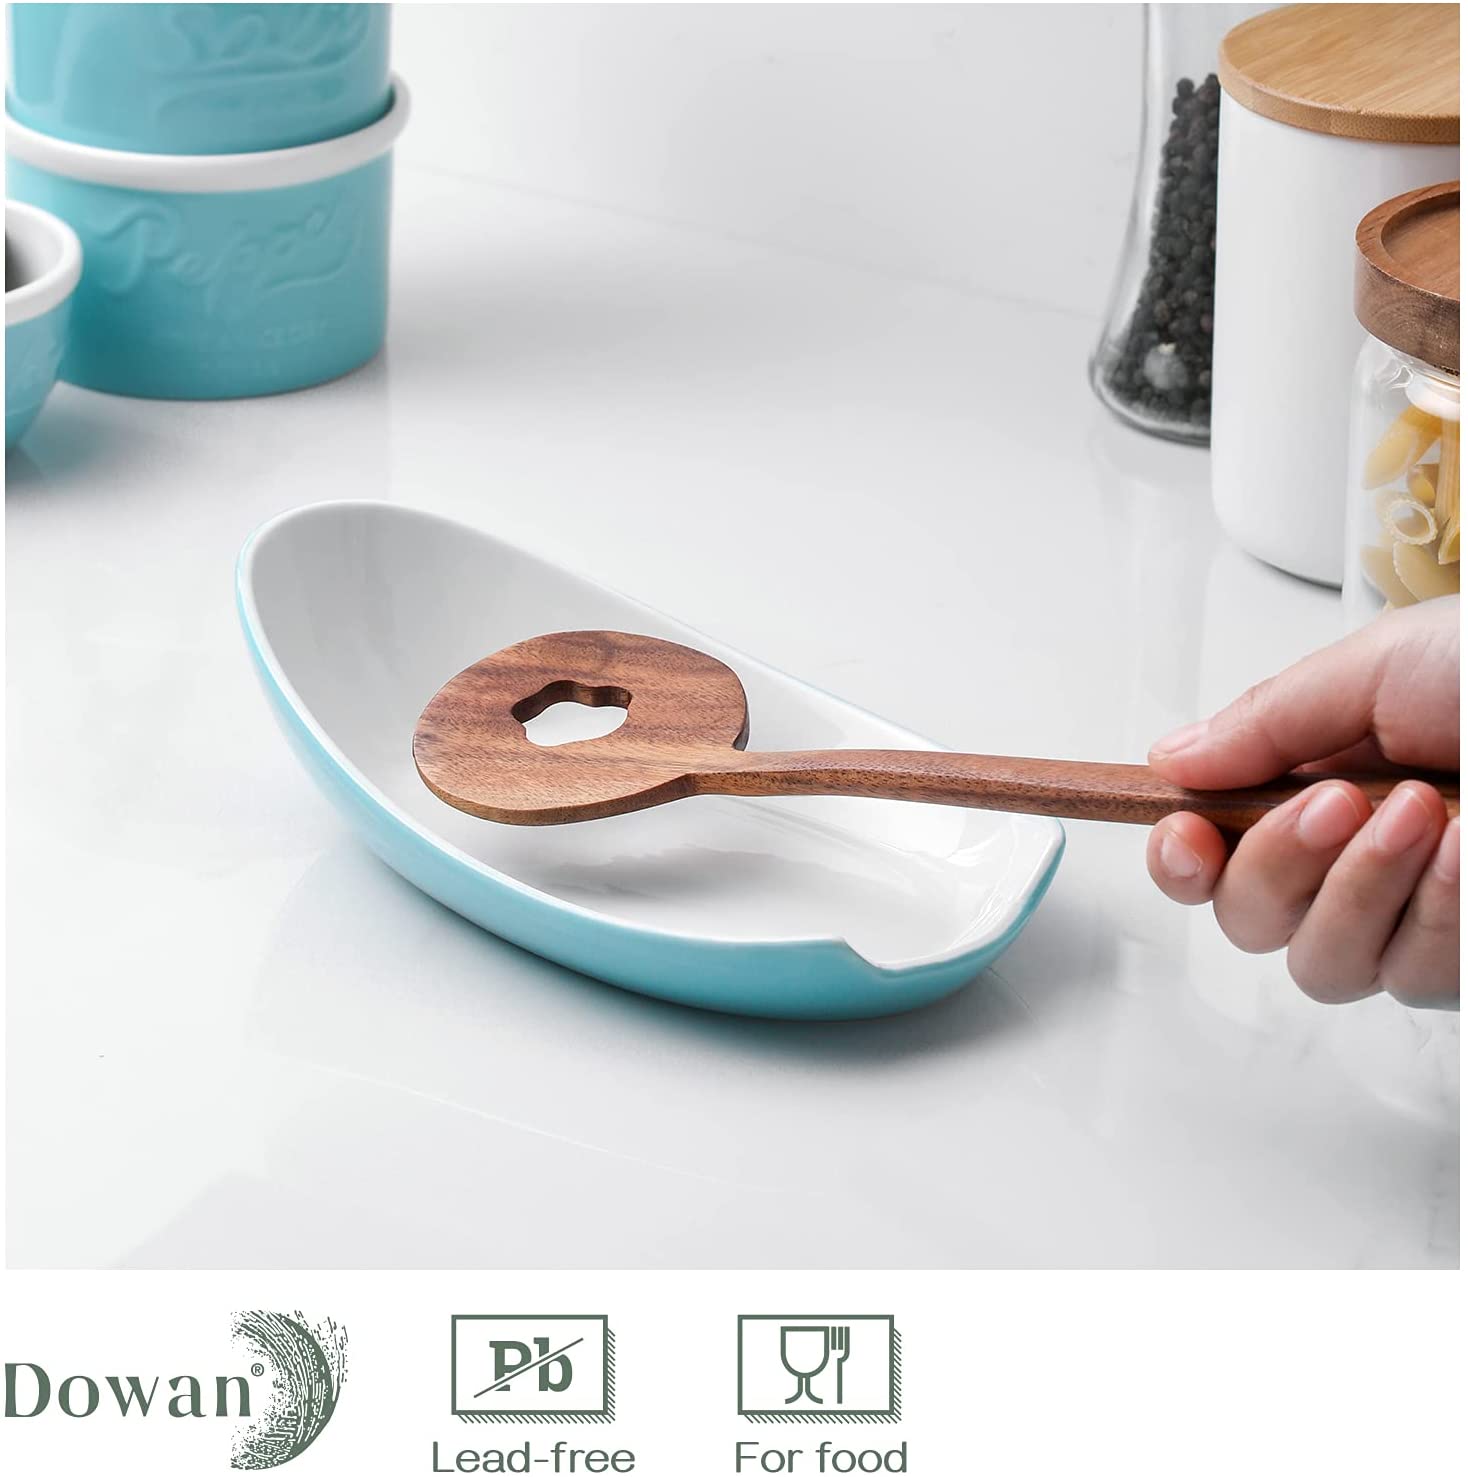 DOWAN Spoon Rest for Kitchen Counter, 7.36 Large Spoon Holder for Stove Top, Ceramic Spoon Rest, Porcelain Ladle Rest, Cute Kitchen Spoon Rest and Accessories, Modern Farmhouse Decor, Turquoise